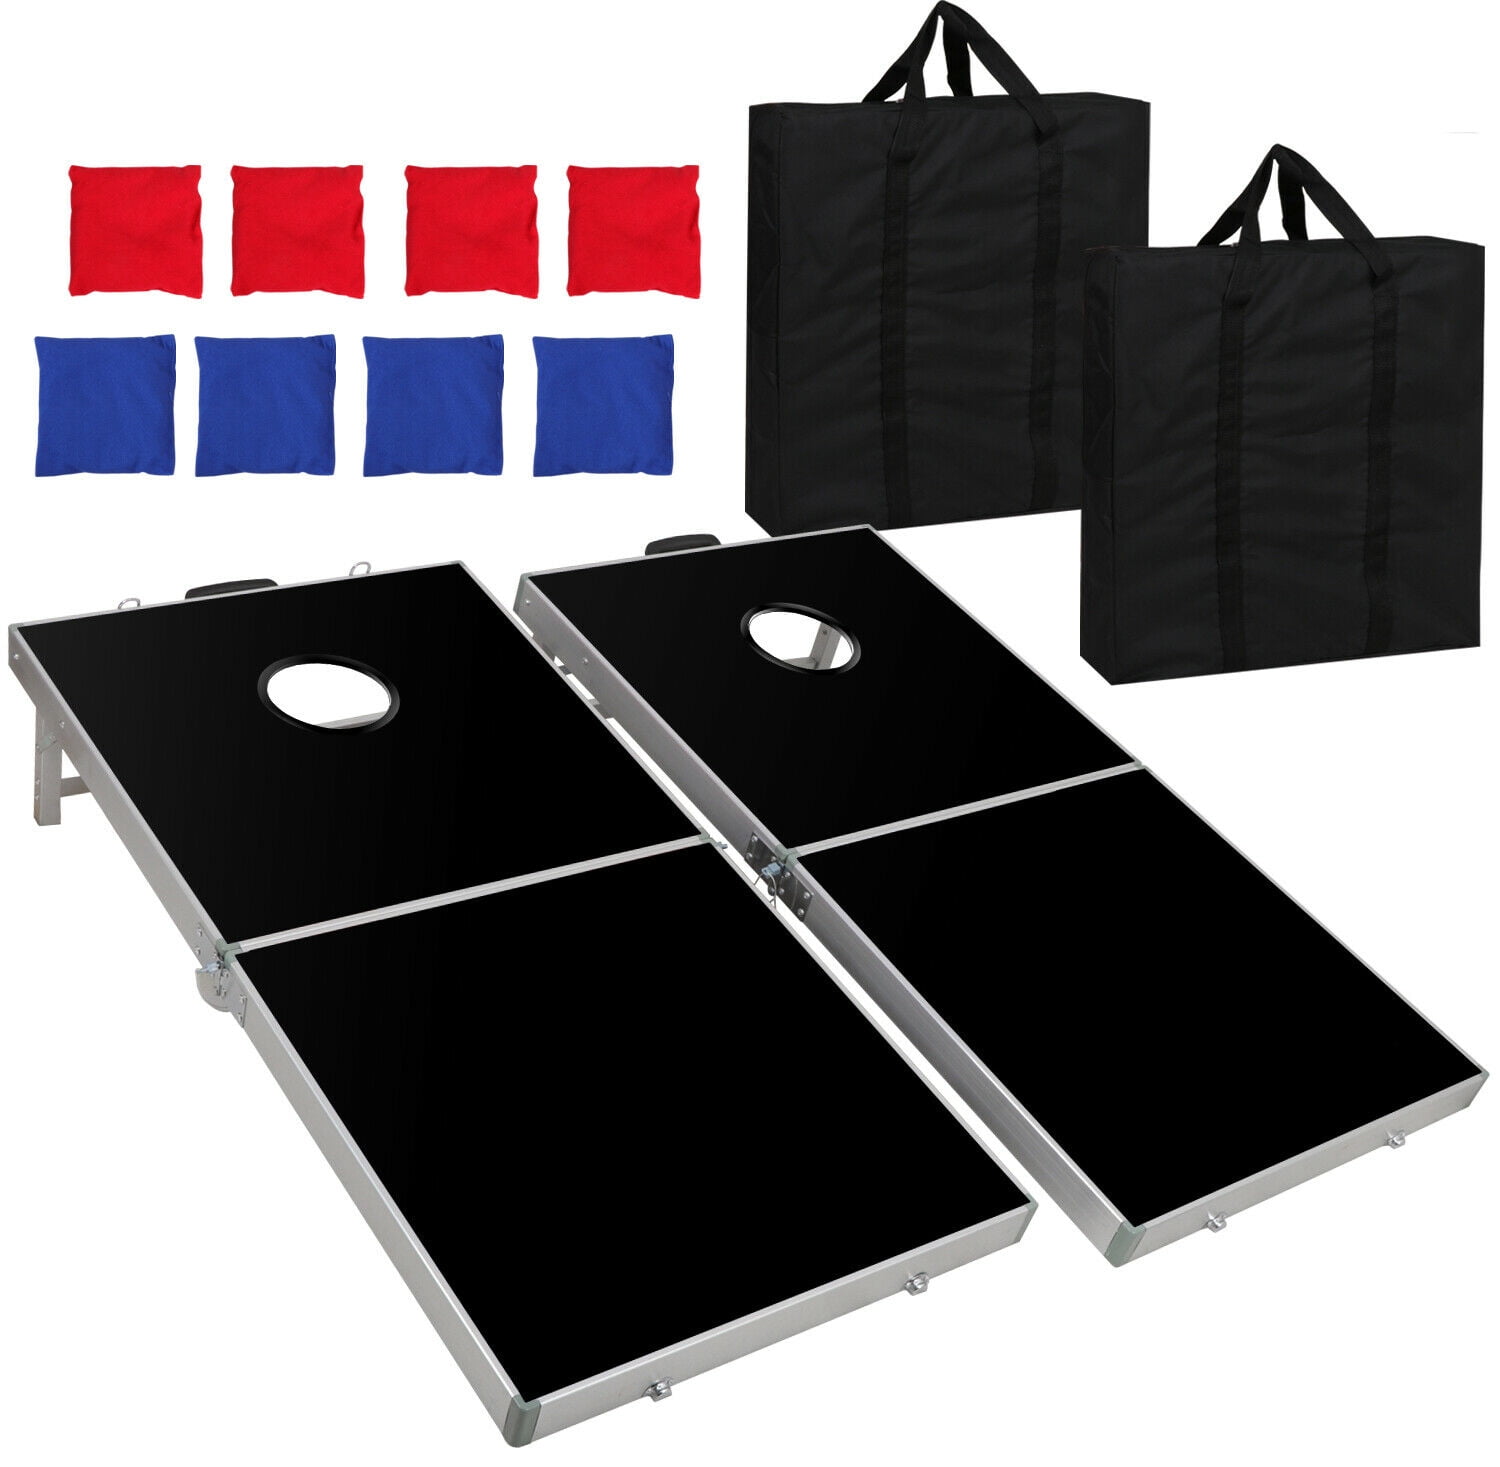 Classic Cornhole Set Includes Portable Boards and 8 Bean Bags Fun Toss Game 